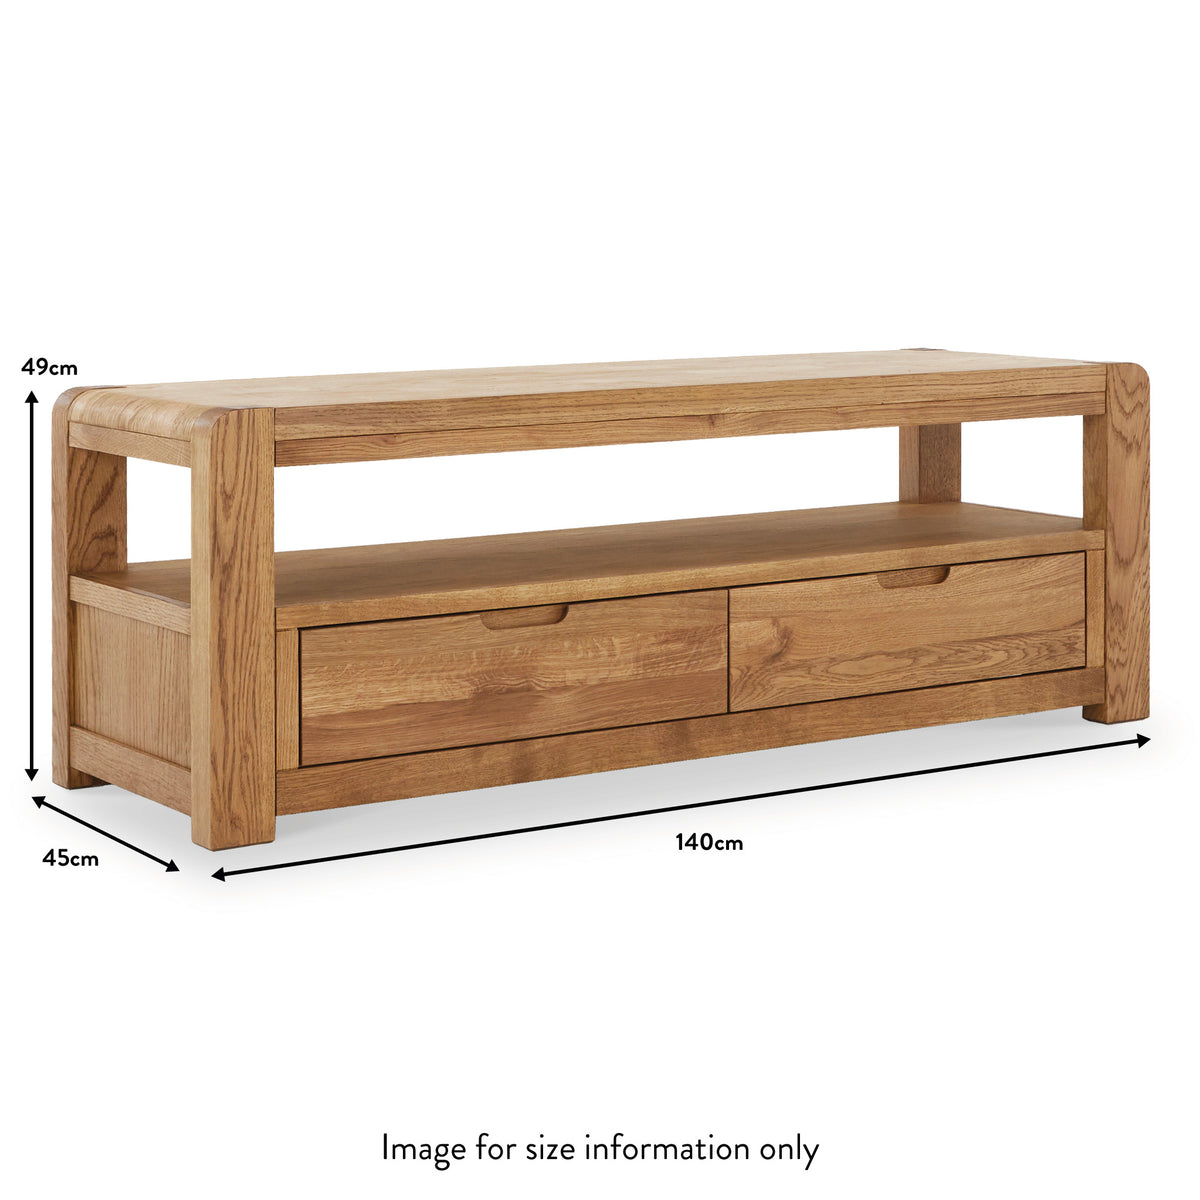 Harvey 140cm TV Stand dimensions